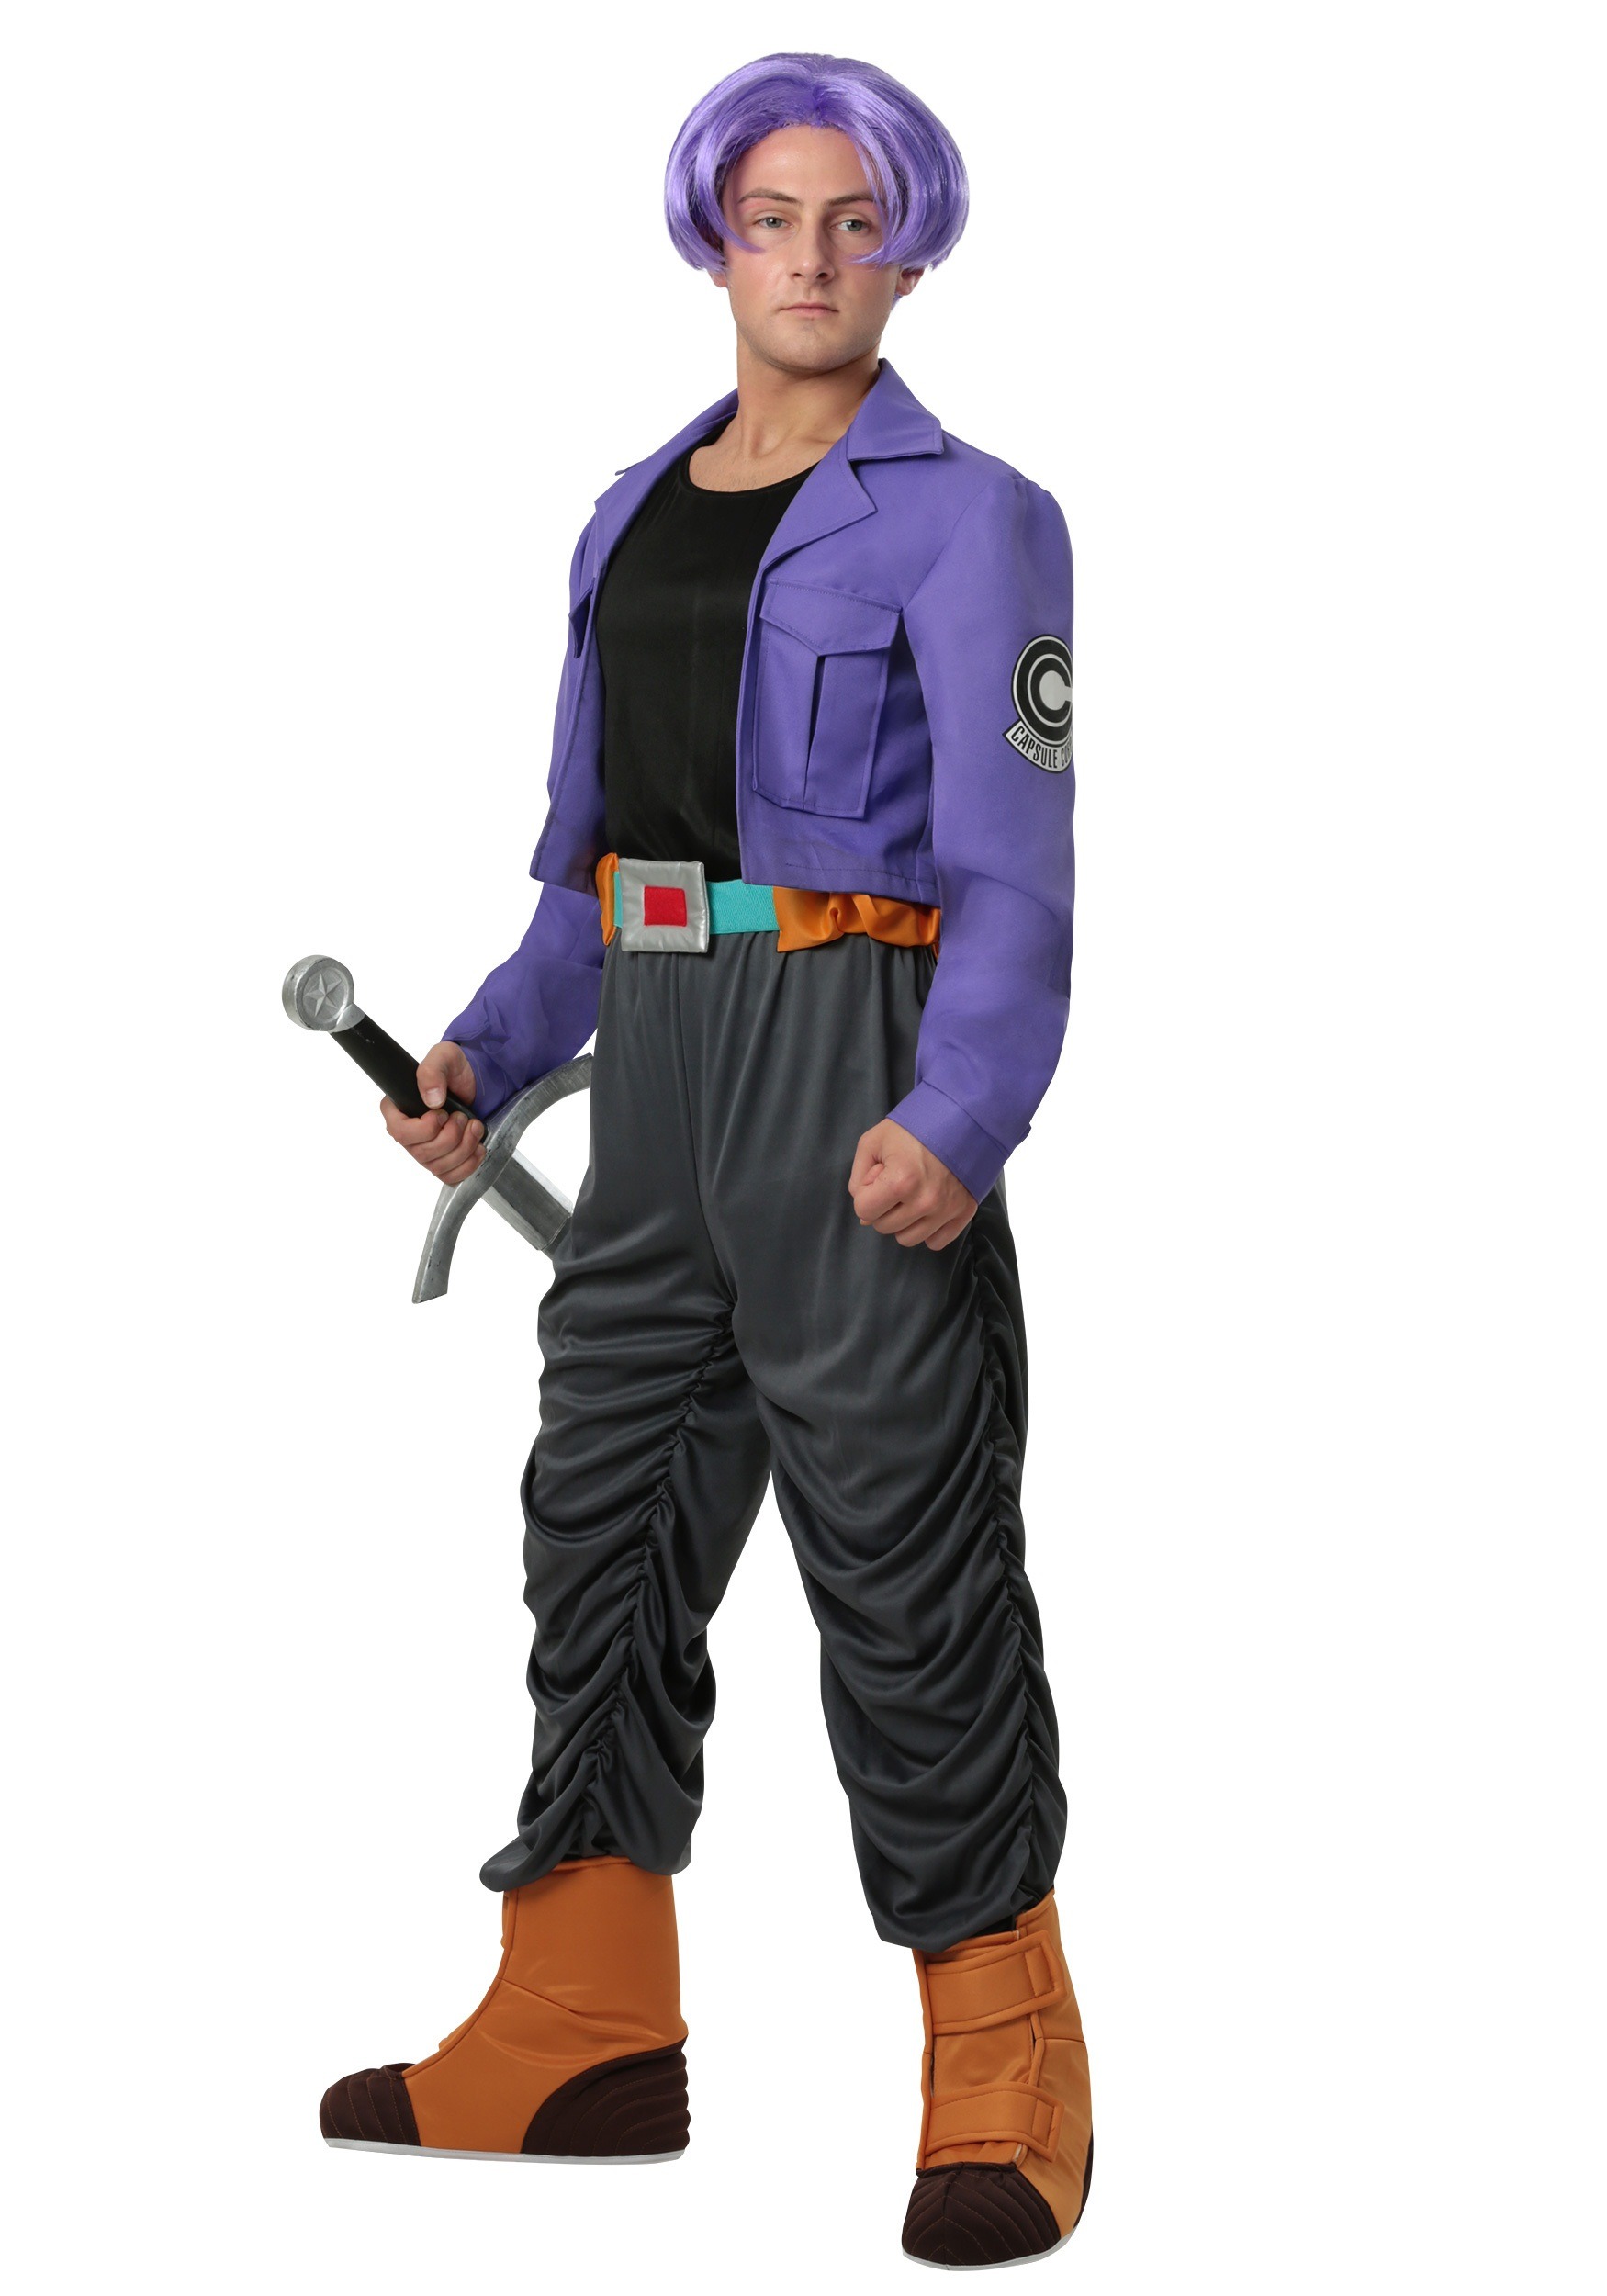 Dragon Ball Z Trunks Costume for Adults | Anime Costumes